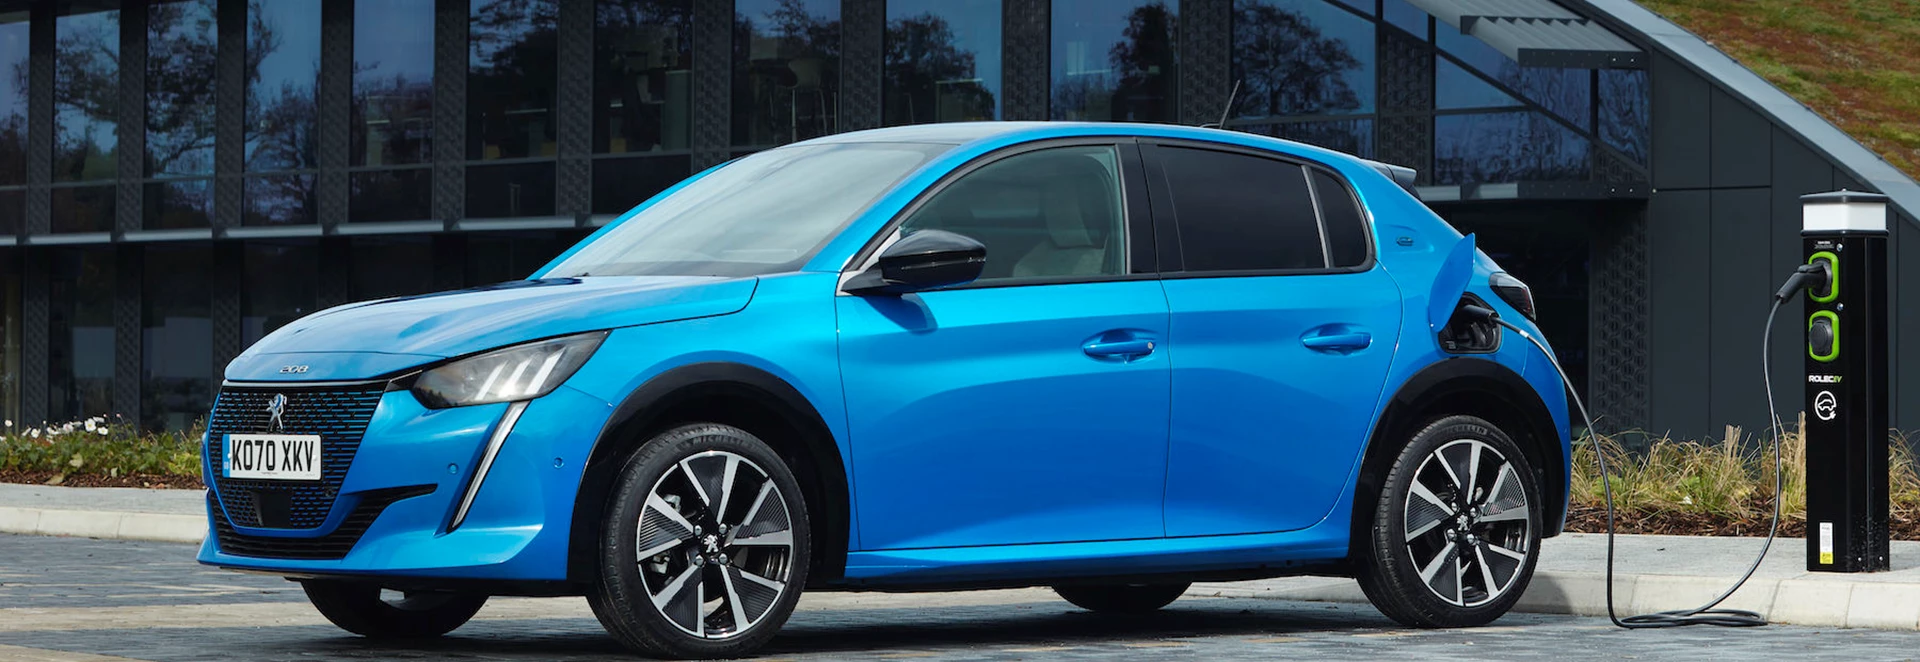 Buyer’s guide to the 2021 Peugeot 208 and e-208 